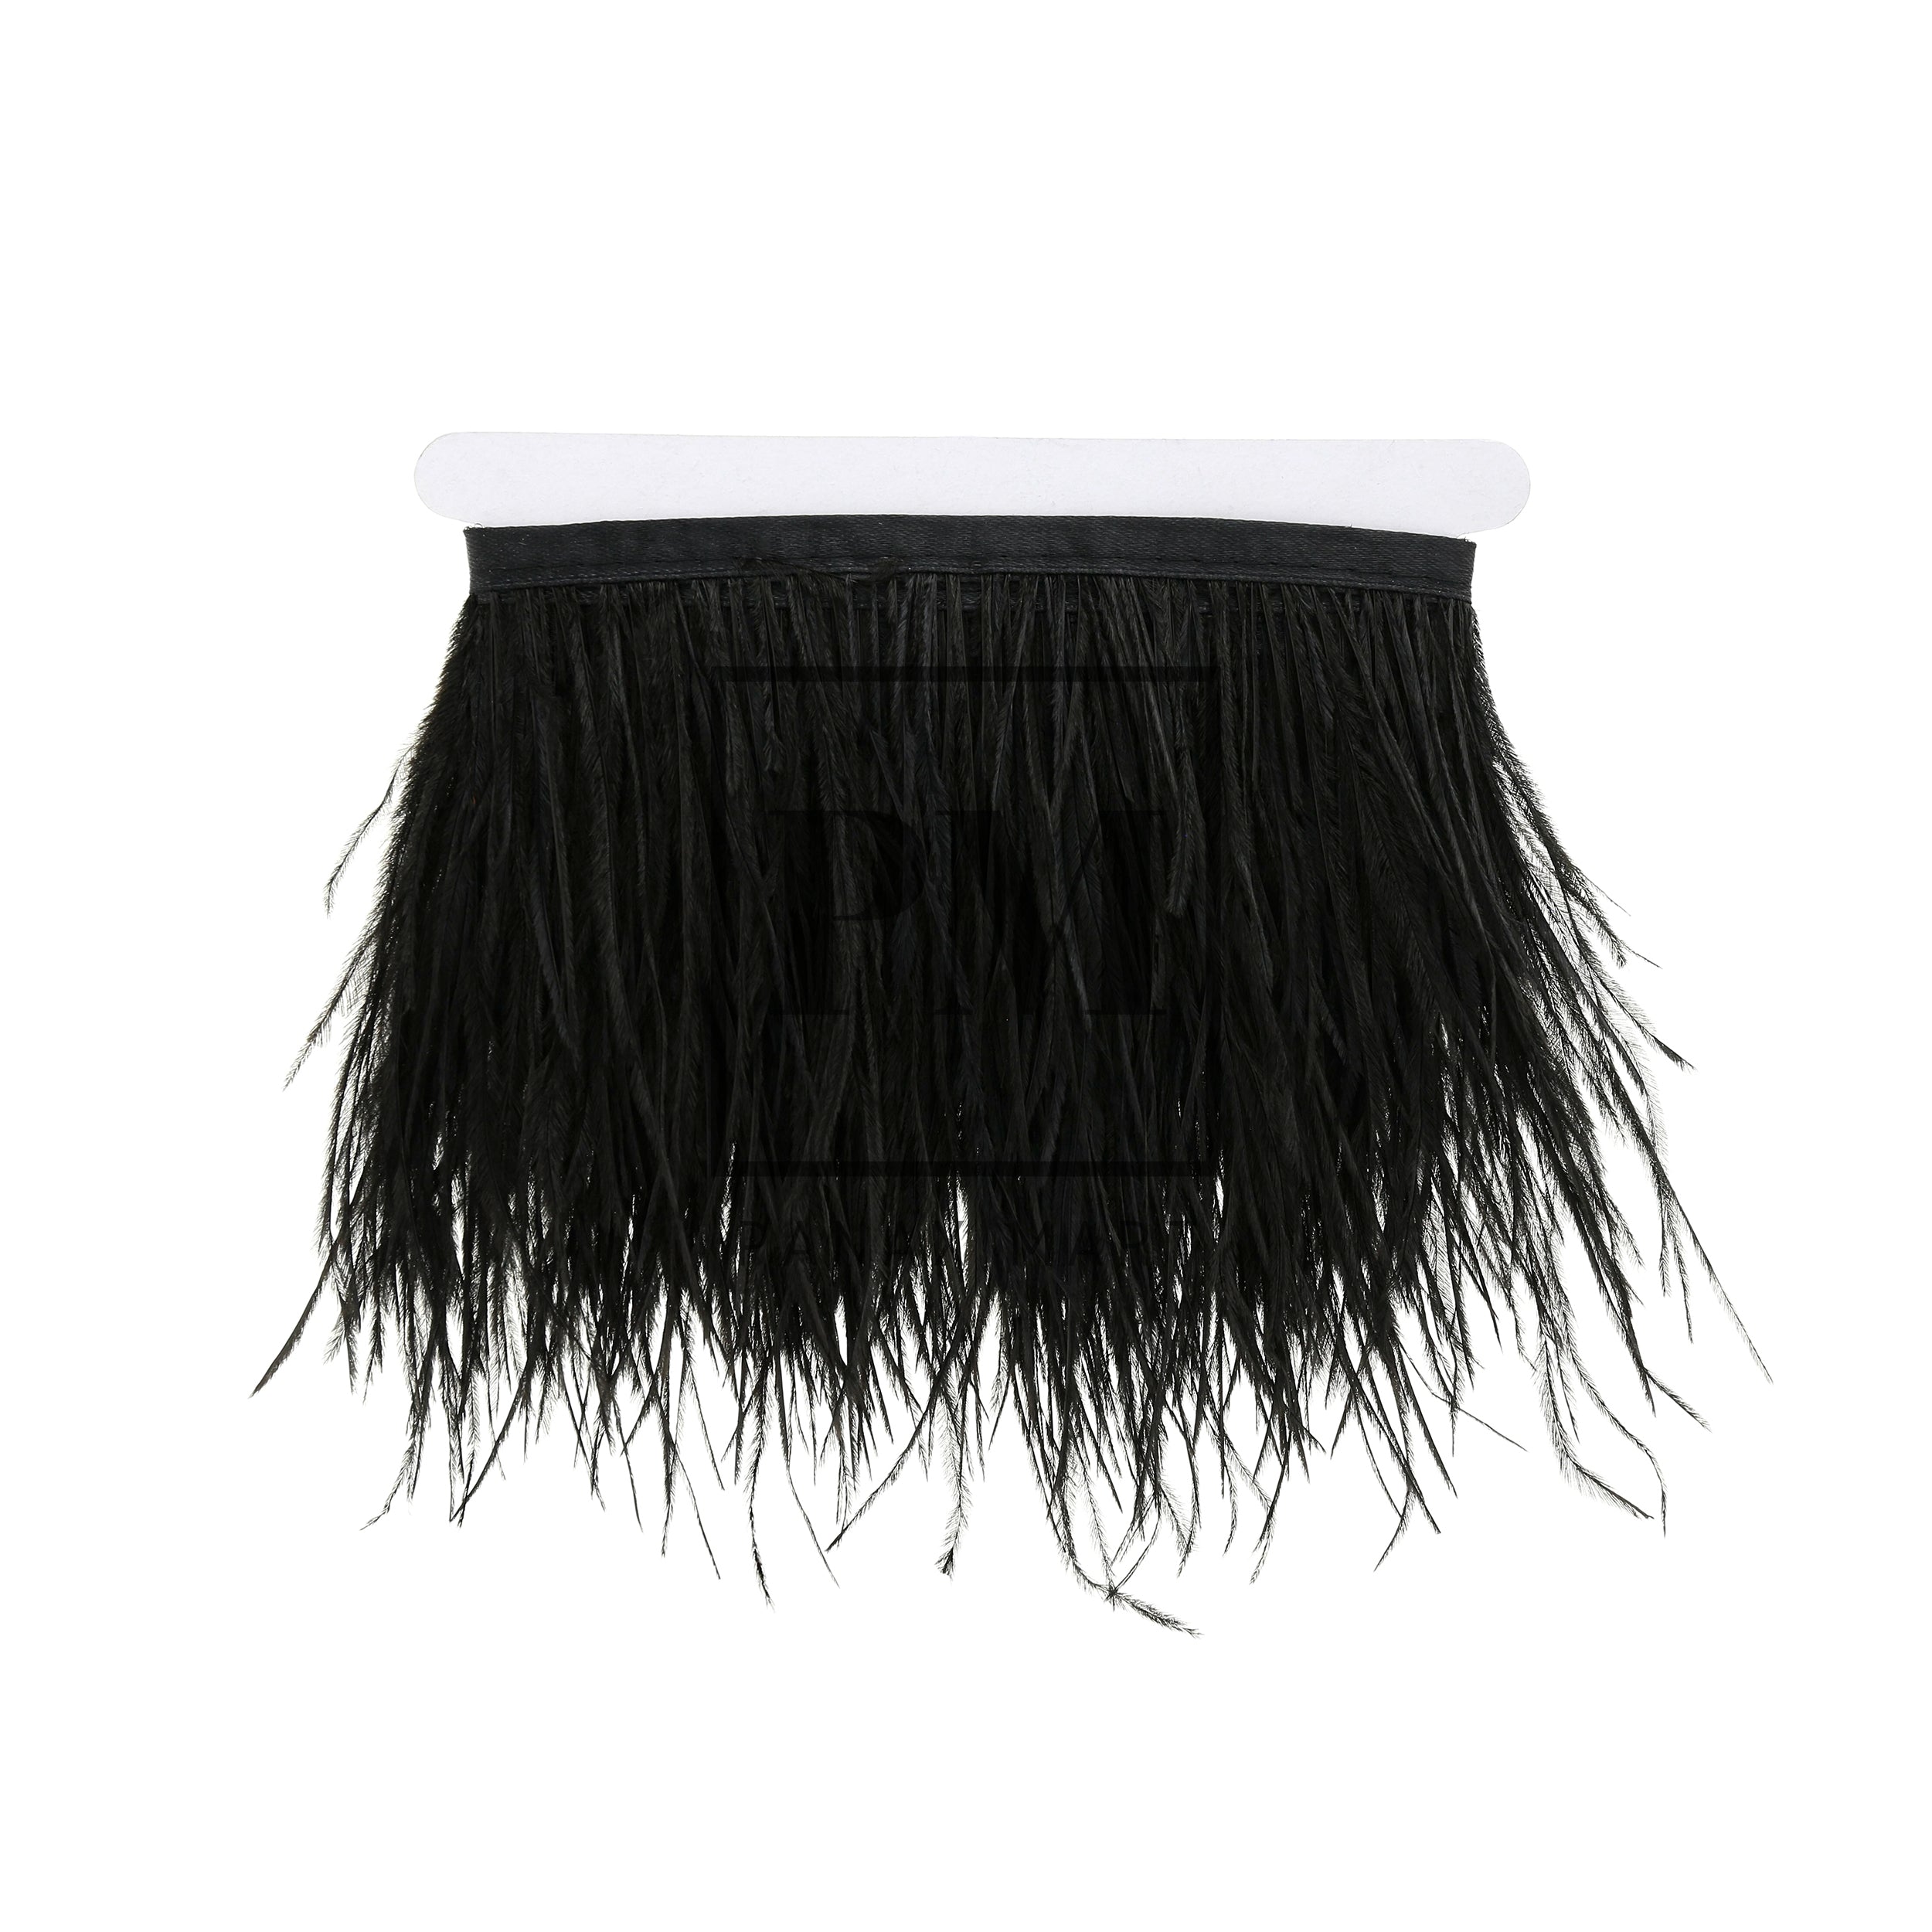 Black Ostrich Feather Trim for Dressmaking and Decor